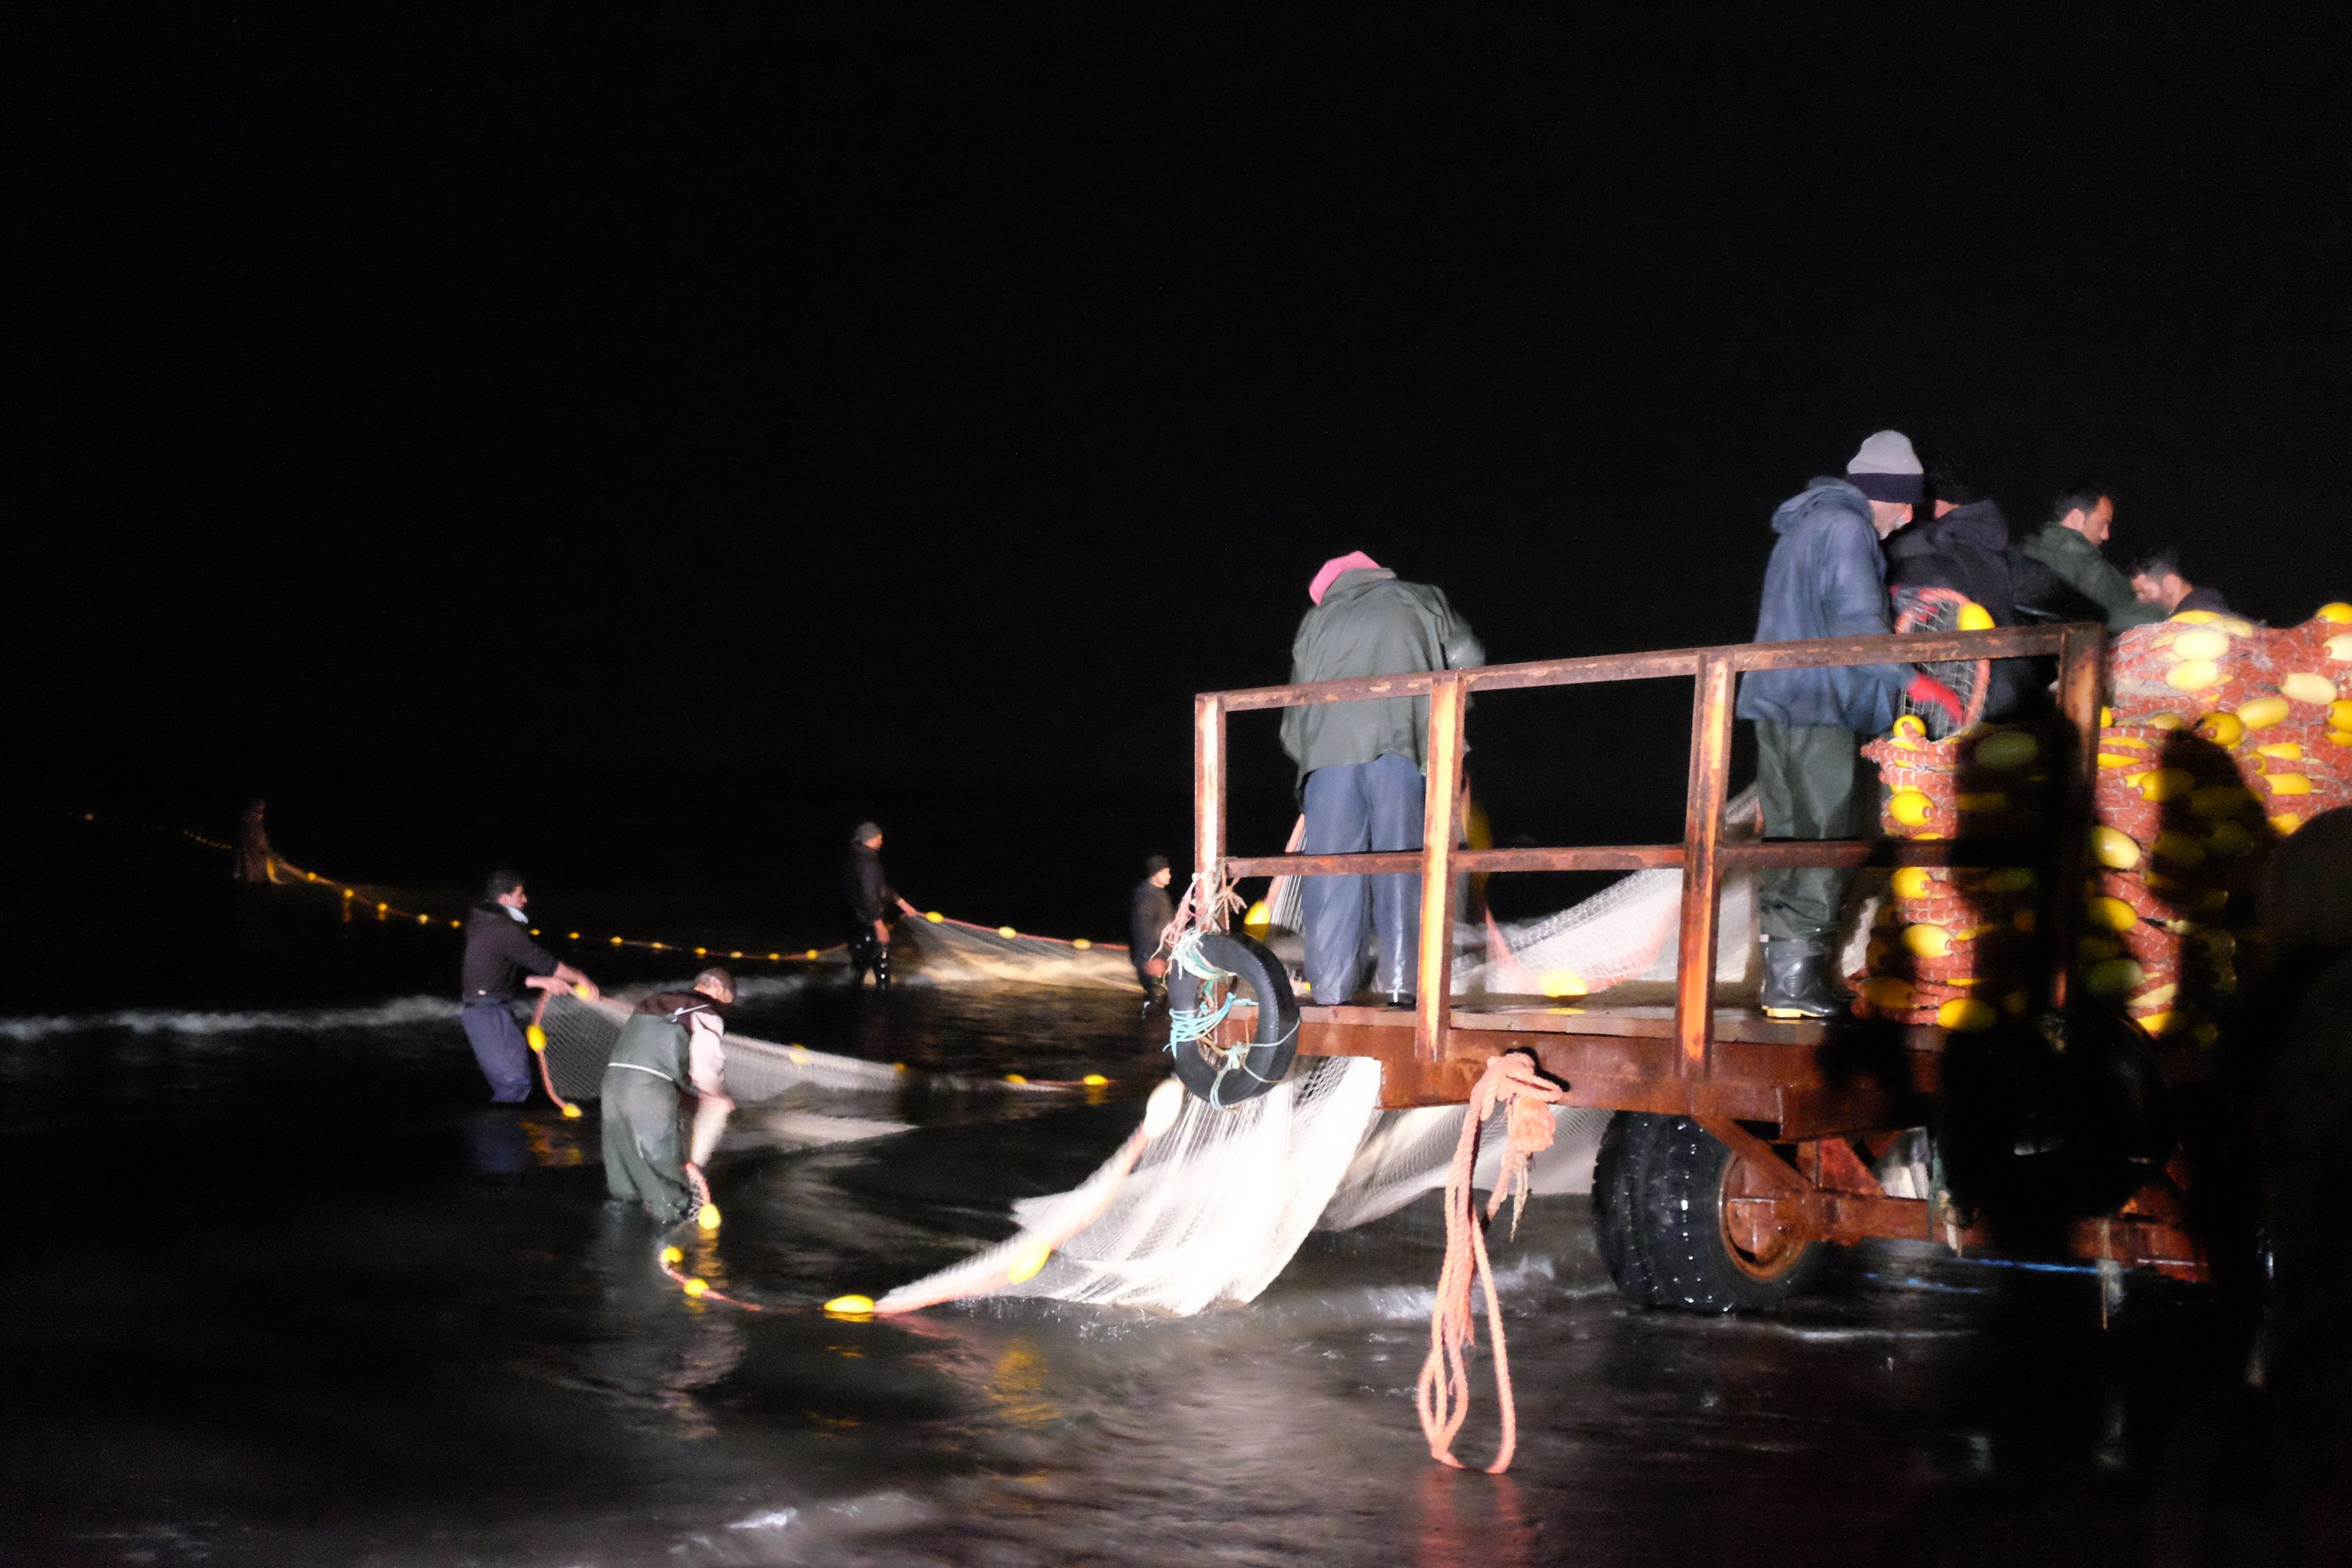 Men drag a fishing net from a sea with a tractor, aided by lights in the complete darkness.